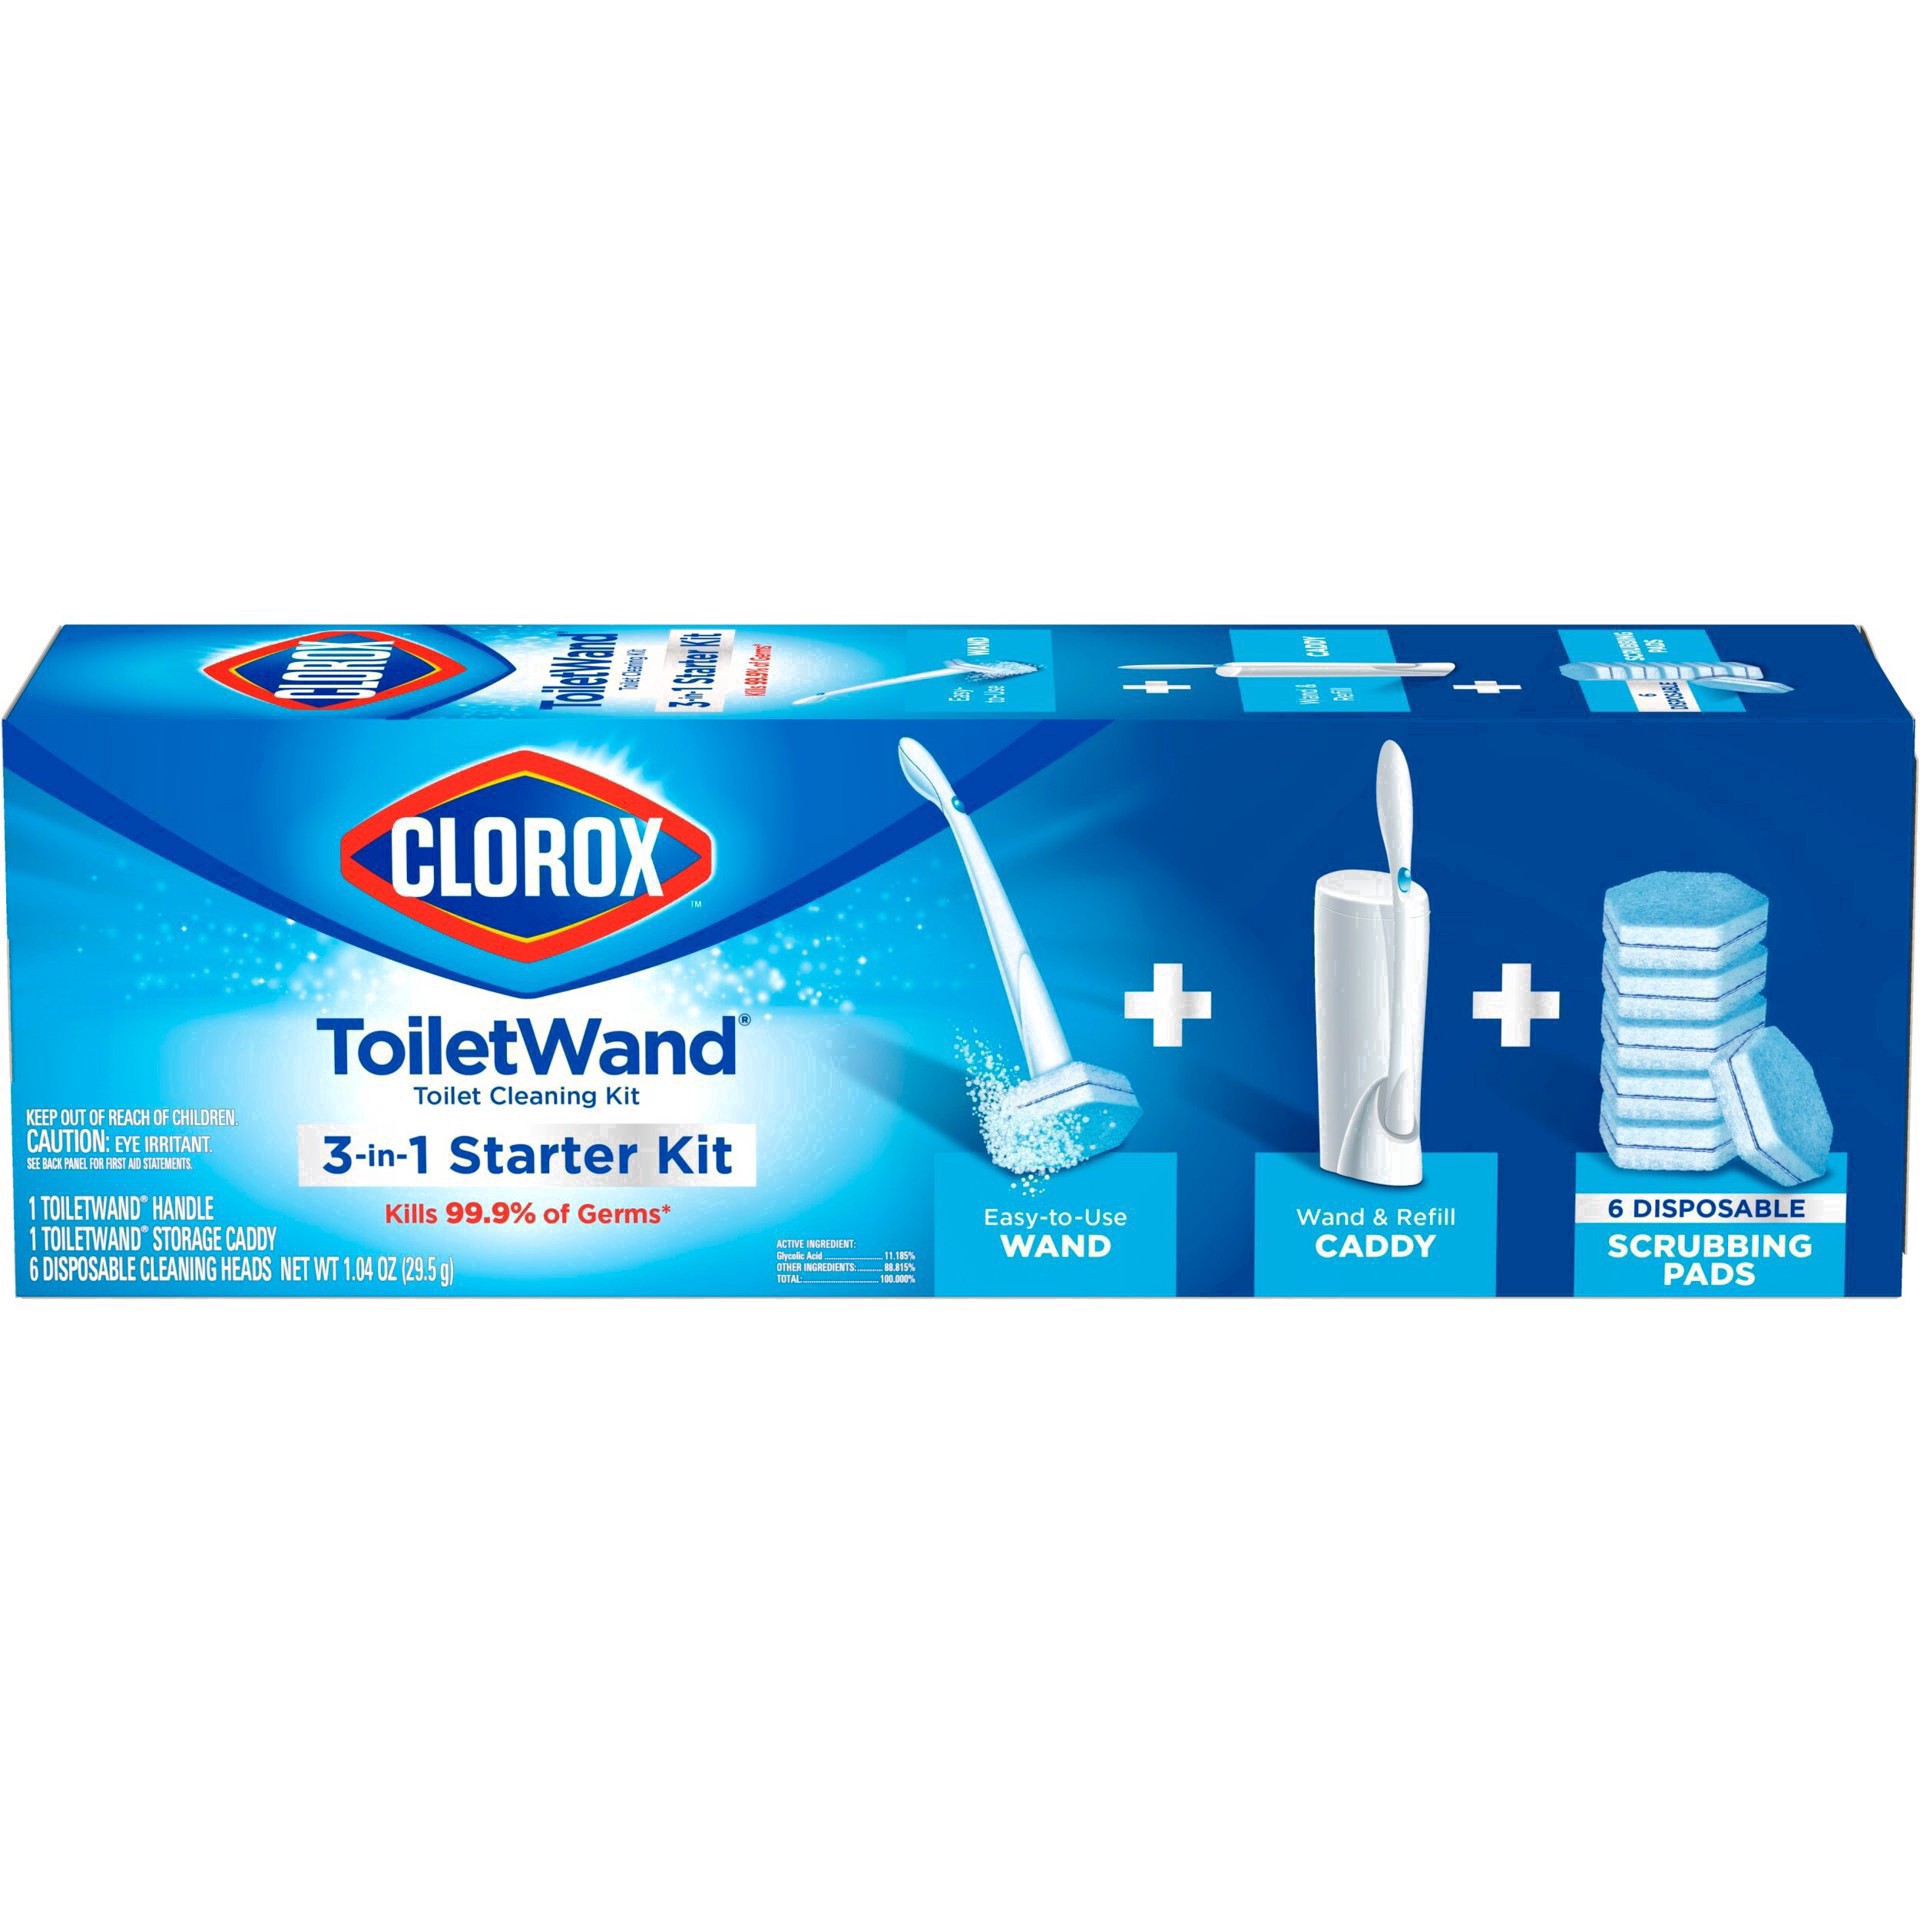 slide 14 of 176, Clorox Toilet Wand 3-in-1 Starter Toliet Cleaning Kit, 1 ct